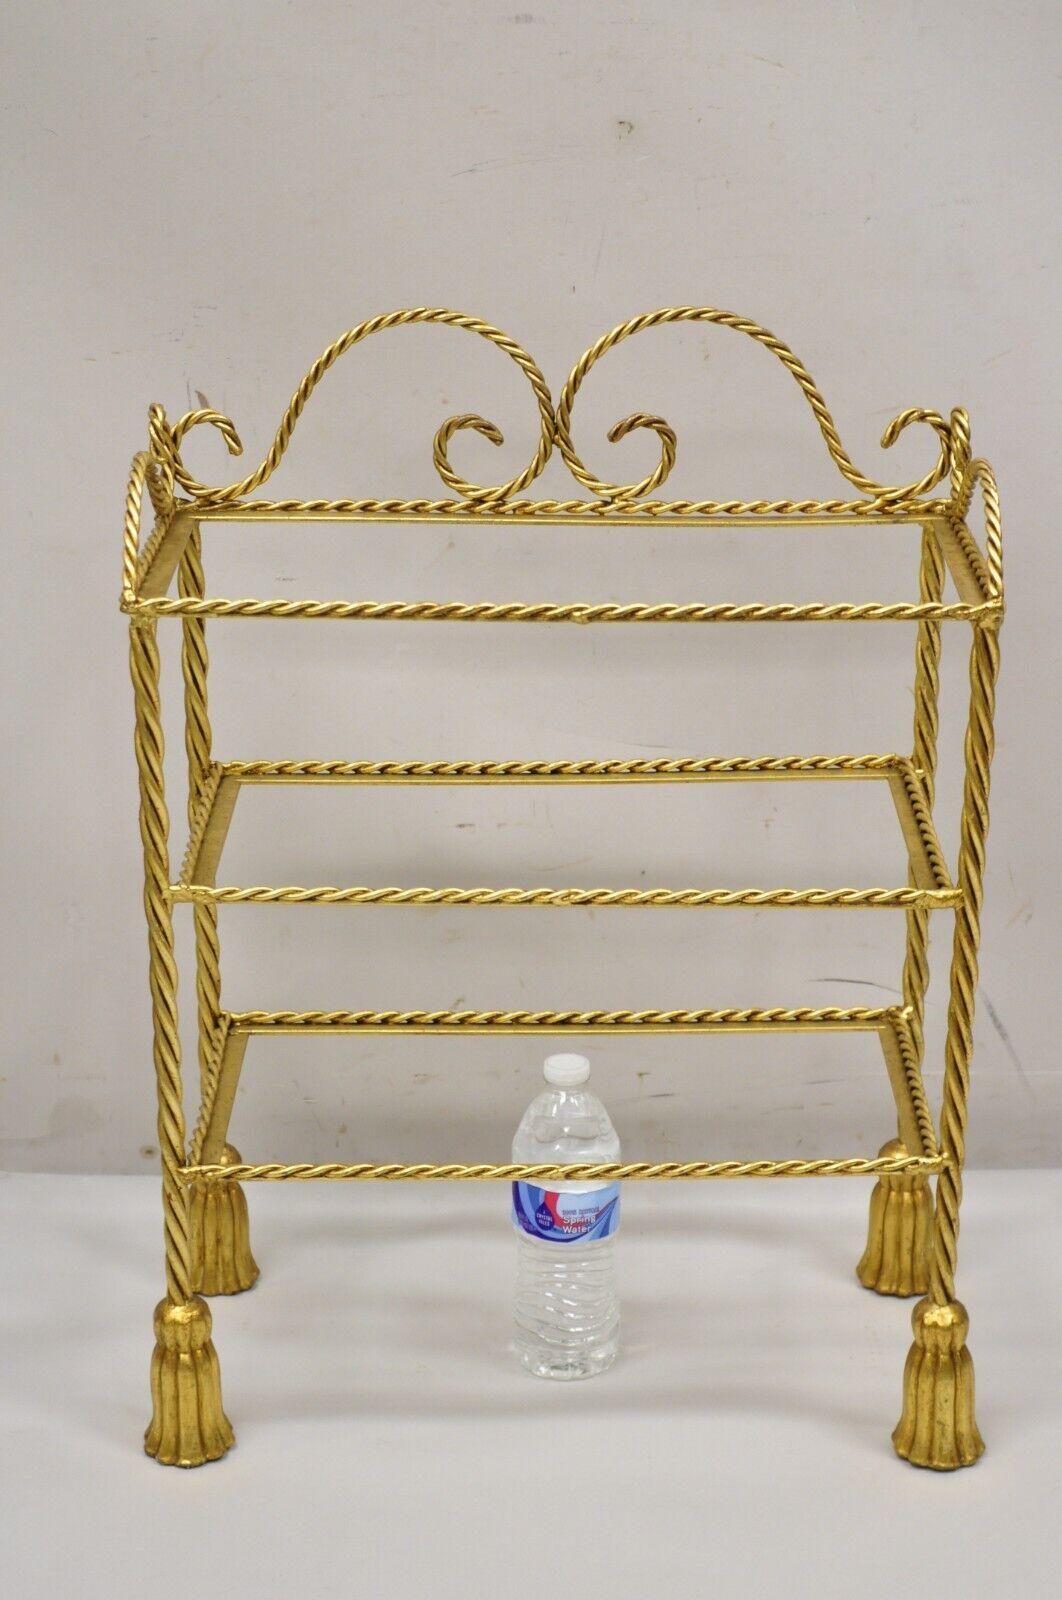 Vintage Italian Hollywood Regency gold gilt iron 3 tier shelf small Curio Display Stand (A). Item features a nice small size, 3 tiers, (no glass for shelves), rope design frame, tassel form feet, wrought iron construction, quality Italian